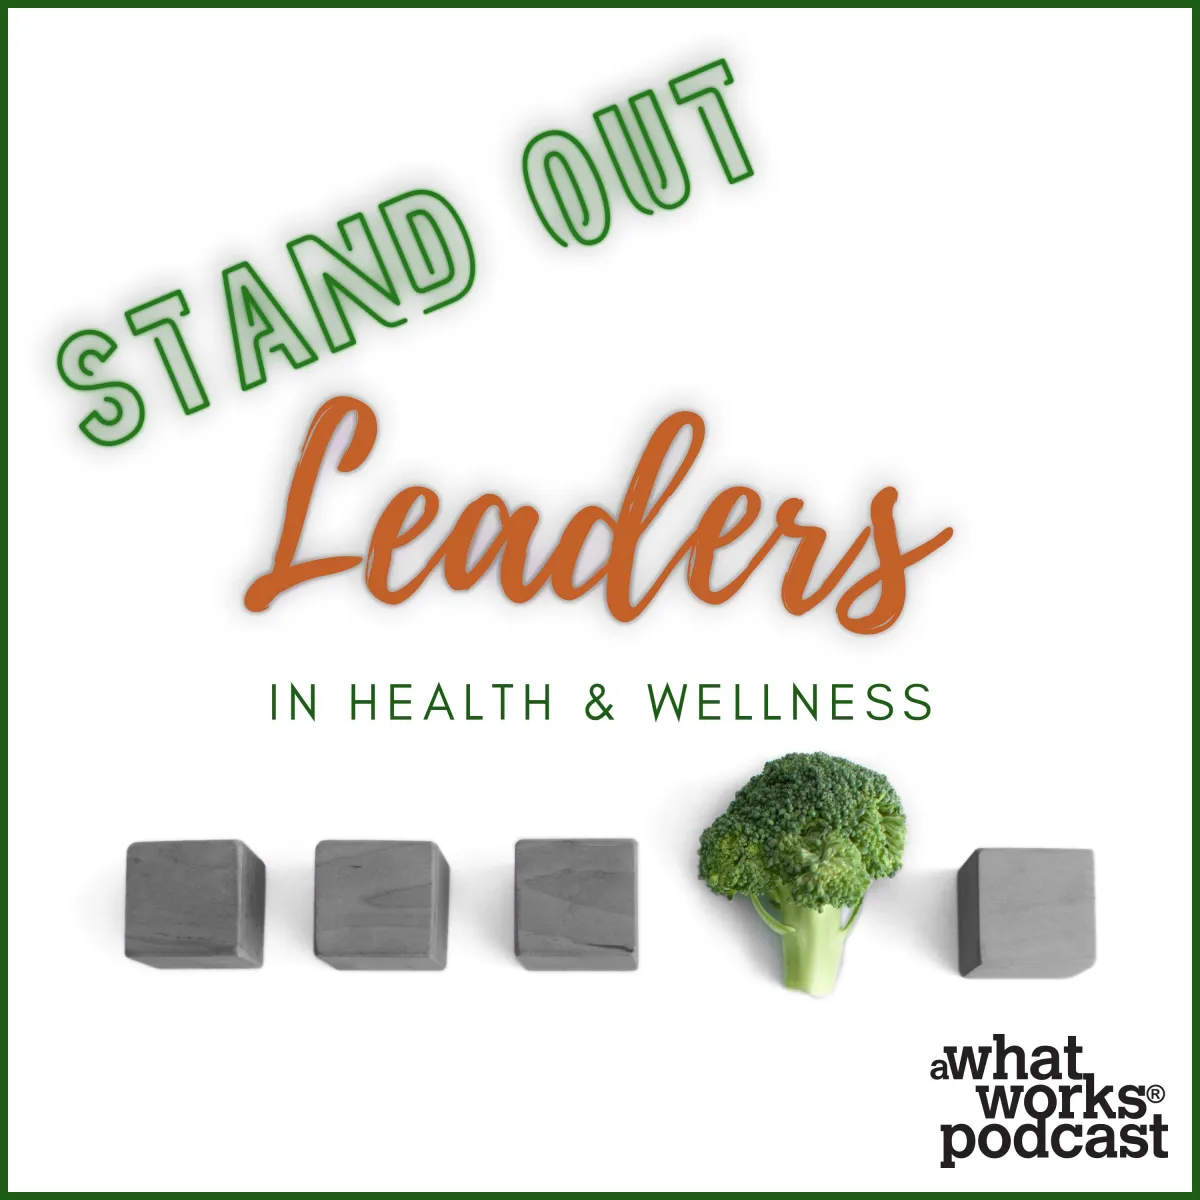 Stand Out Leaders in Health & Wellness Podcast Logo